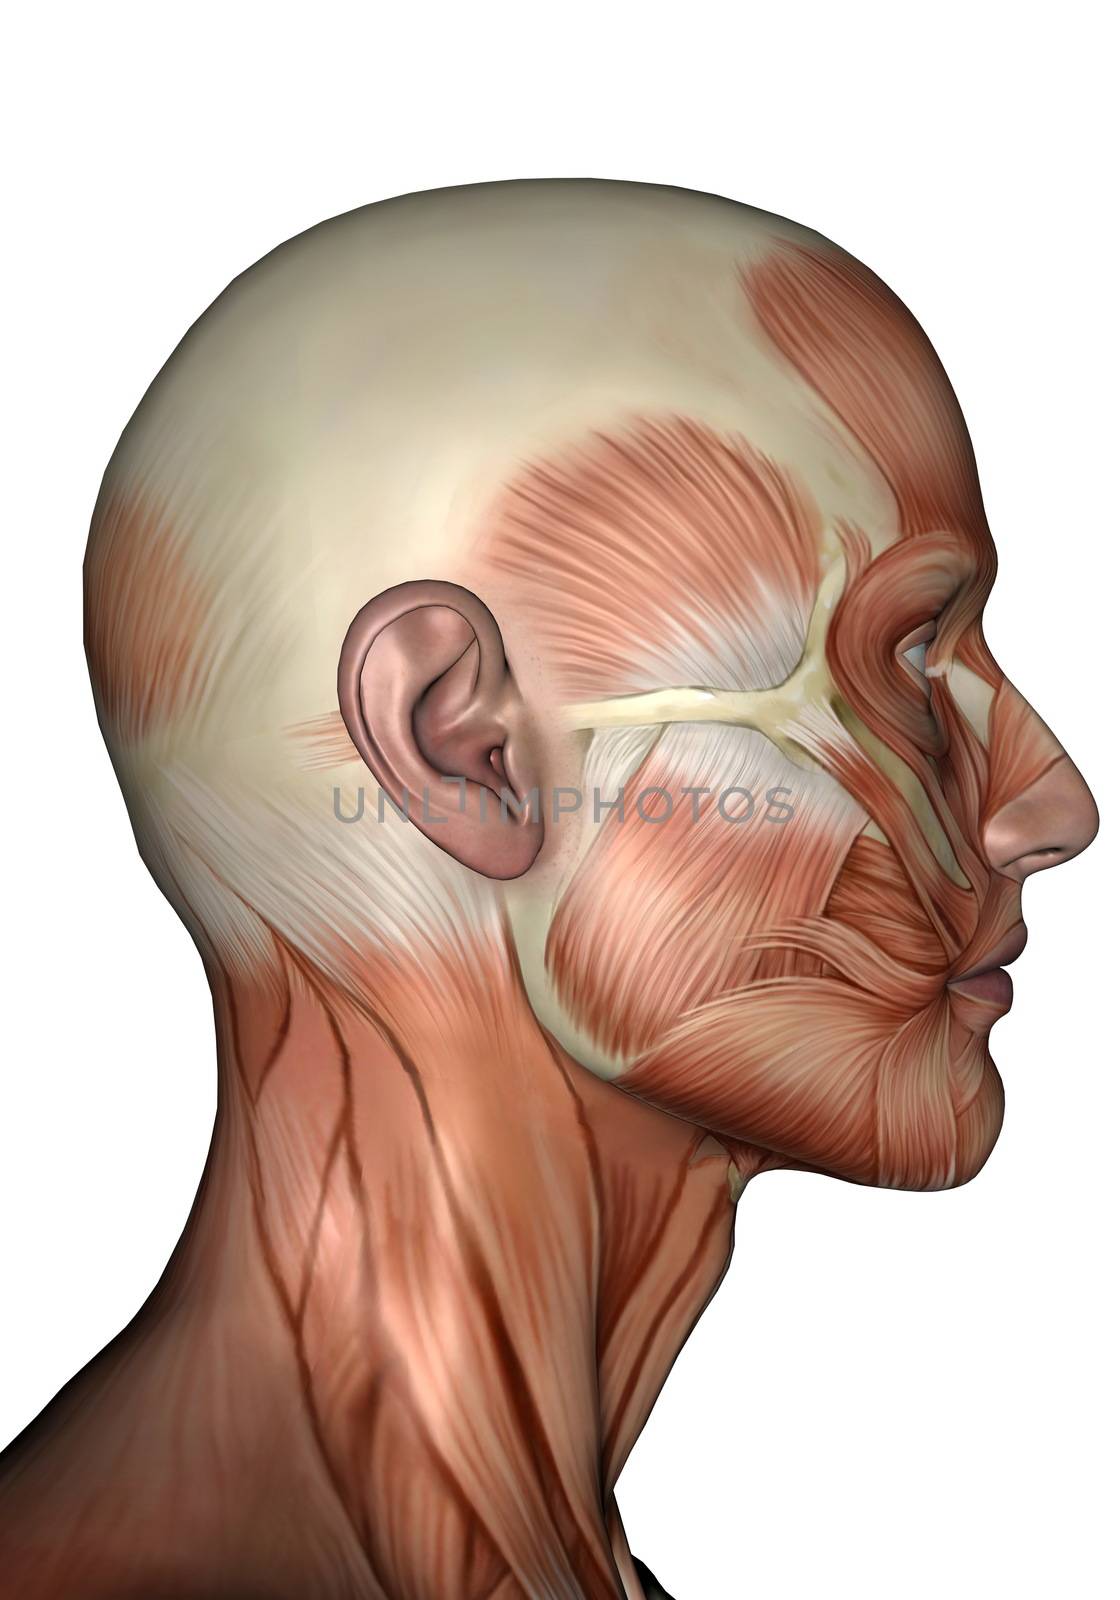 Profile head muscles of man - 3D render by Elenaphotos21